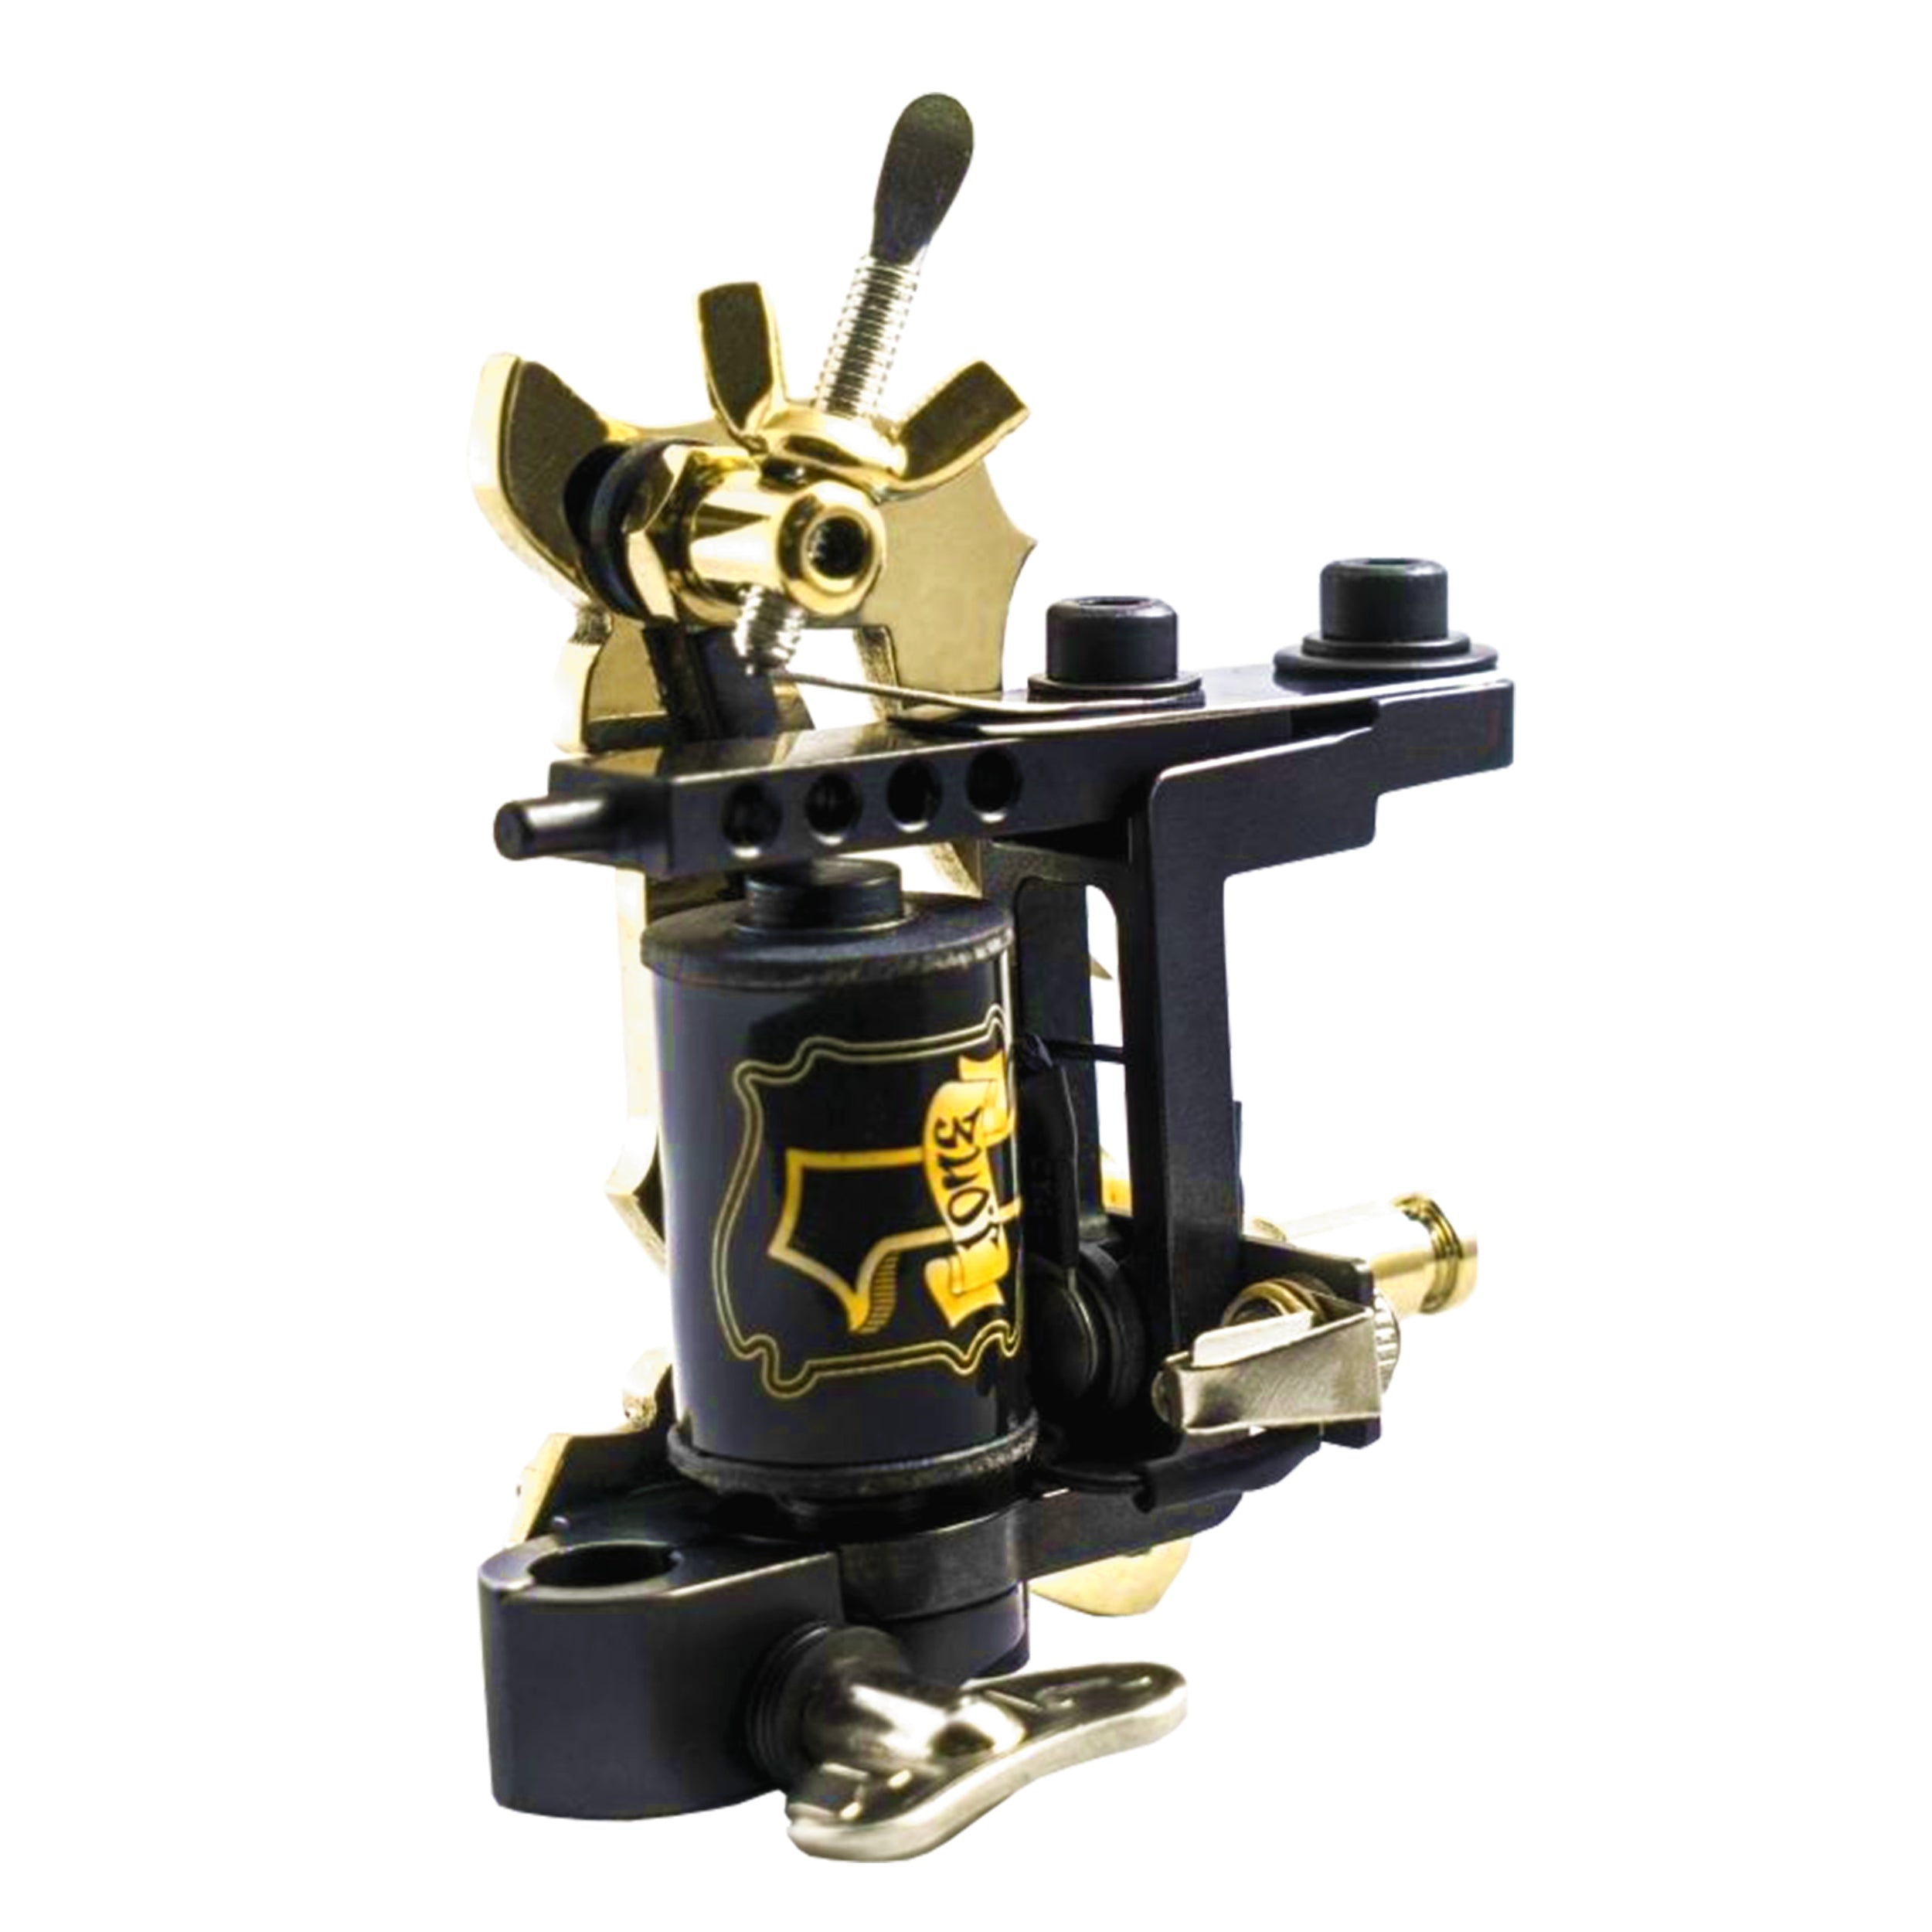 Jack Rudy Limited Edition Coil Machine - Black